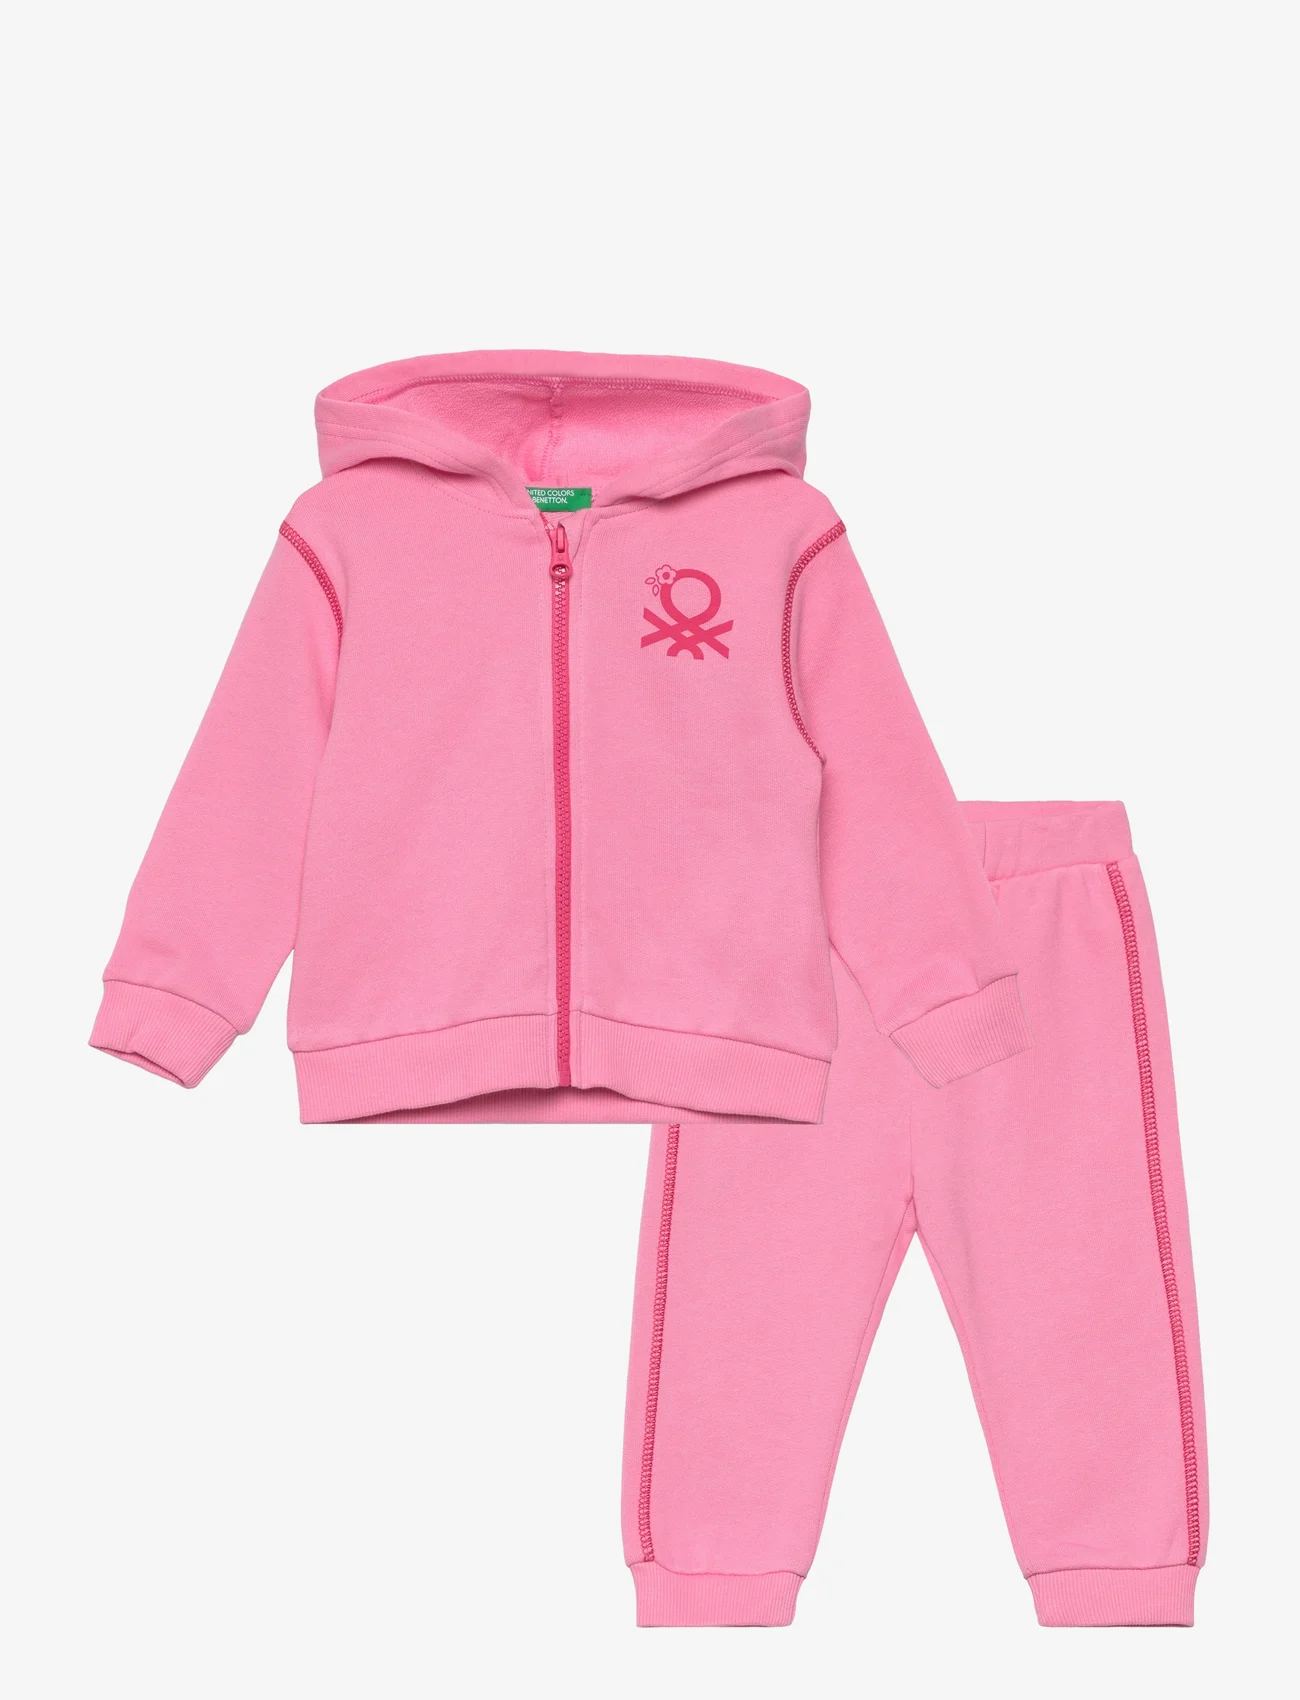 United Colors of Benetton - SET JACKET+TROUSERS - laveste priser - pink - 0